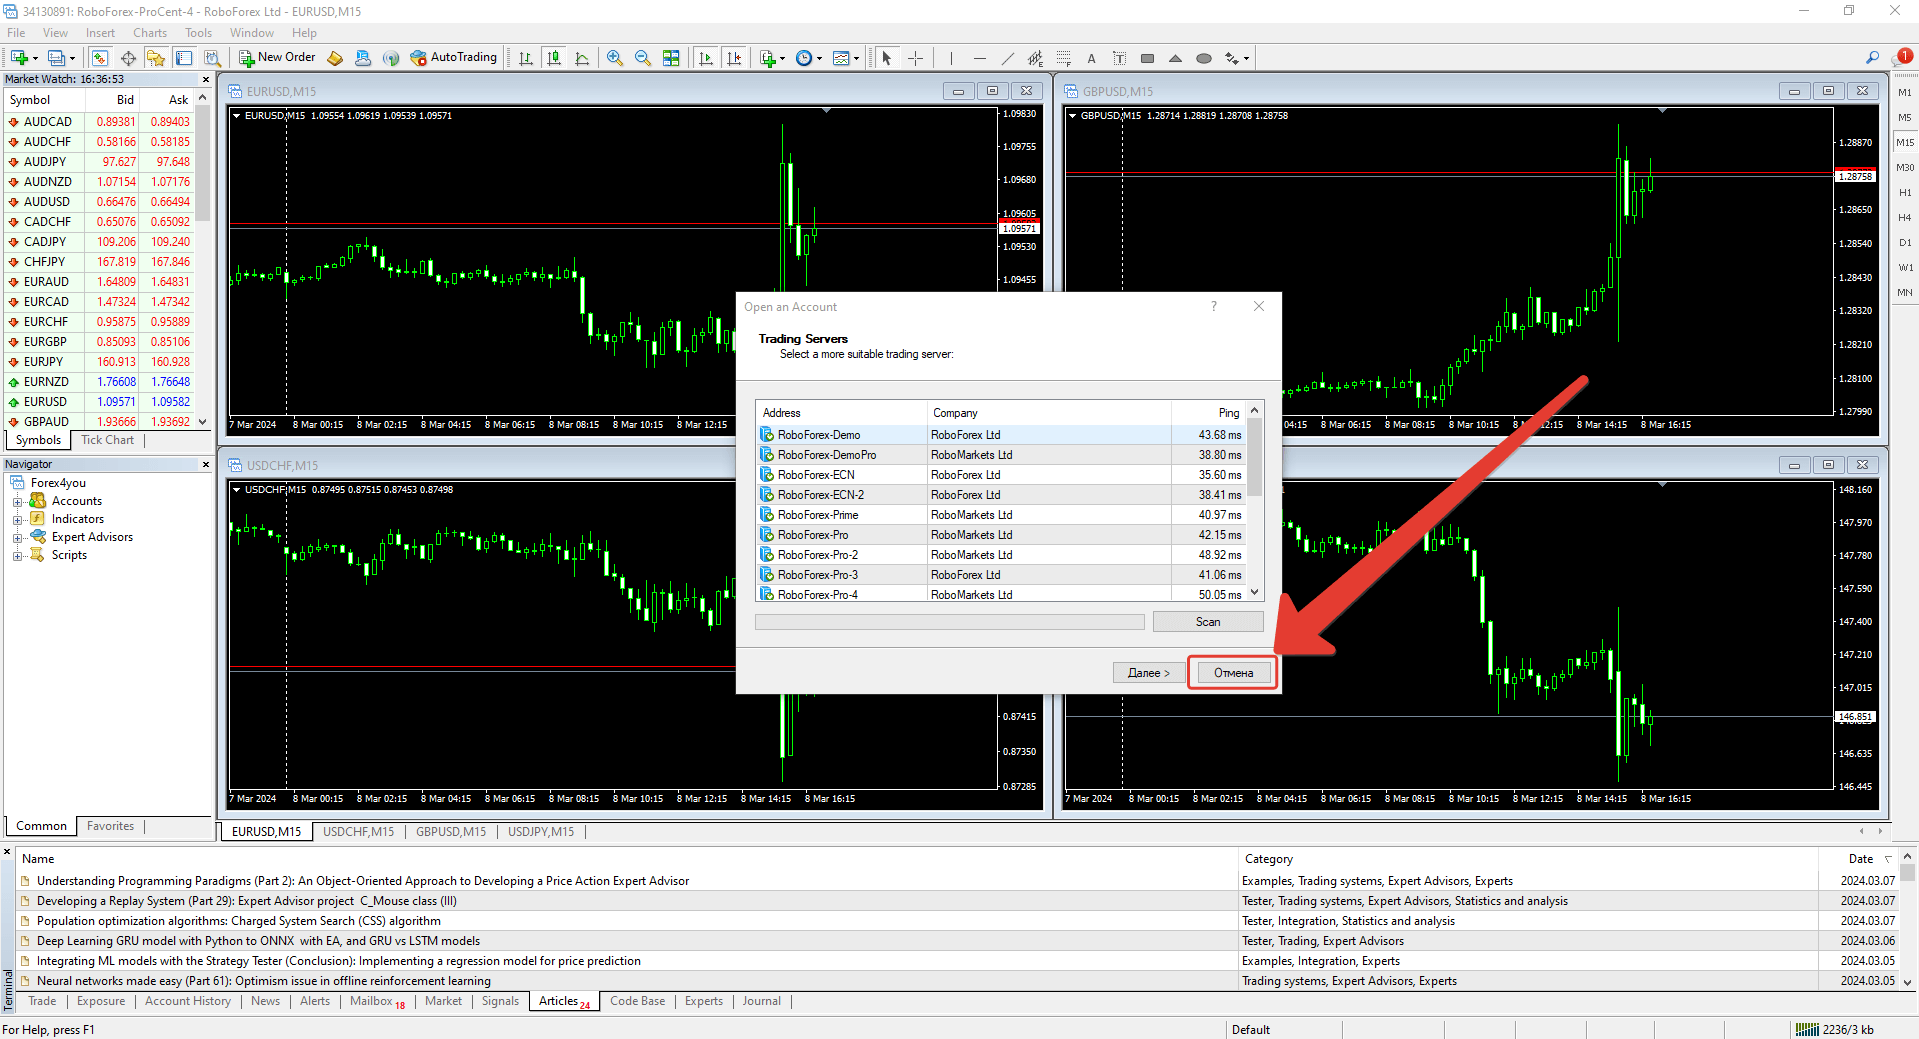 Installation and configuration of the trading terminal - terminal window, first launch